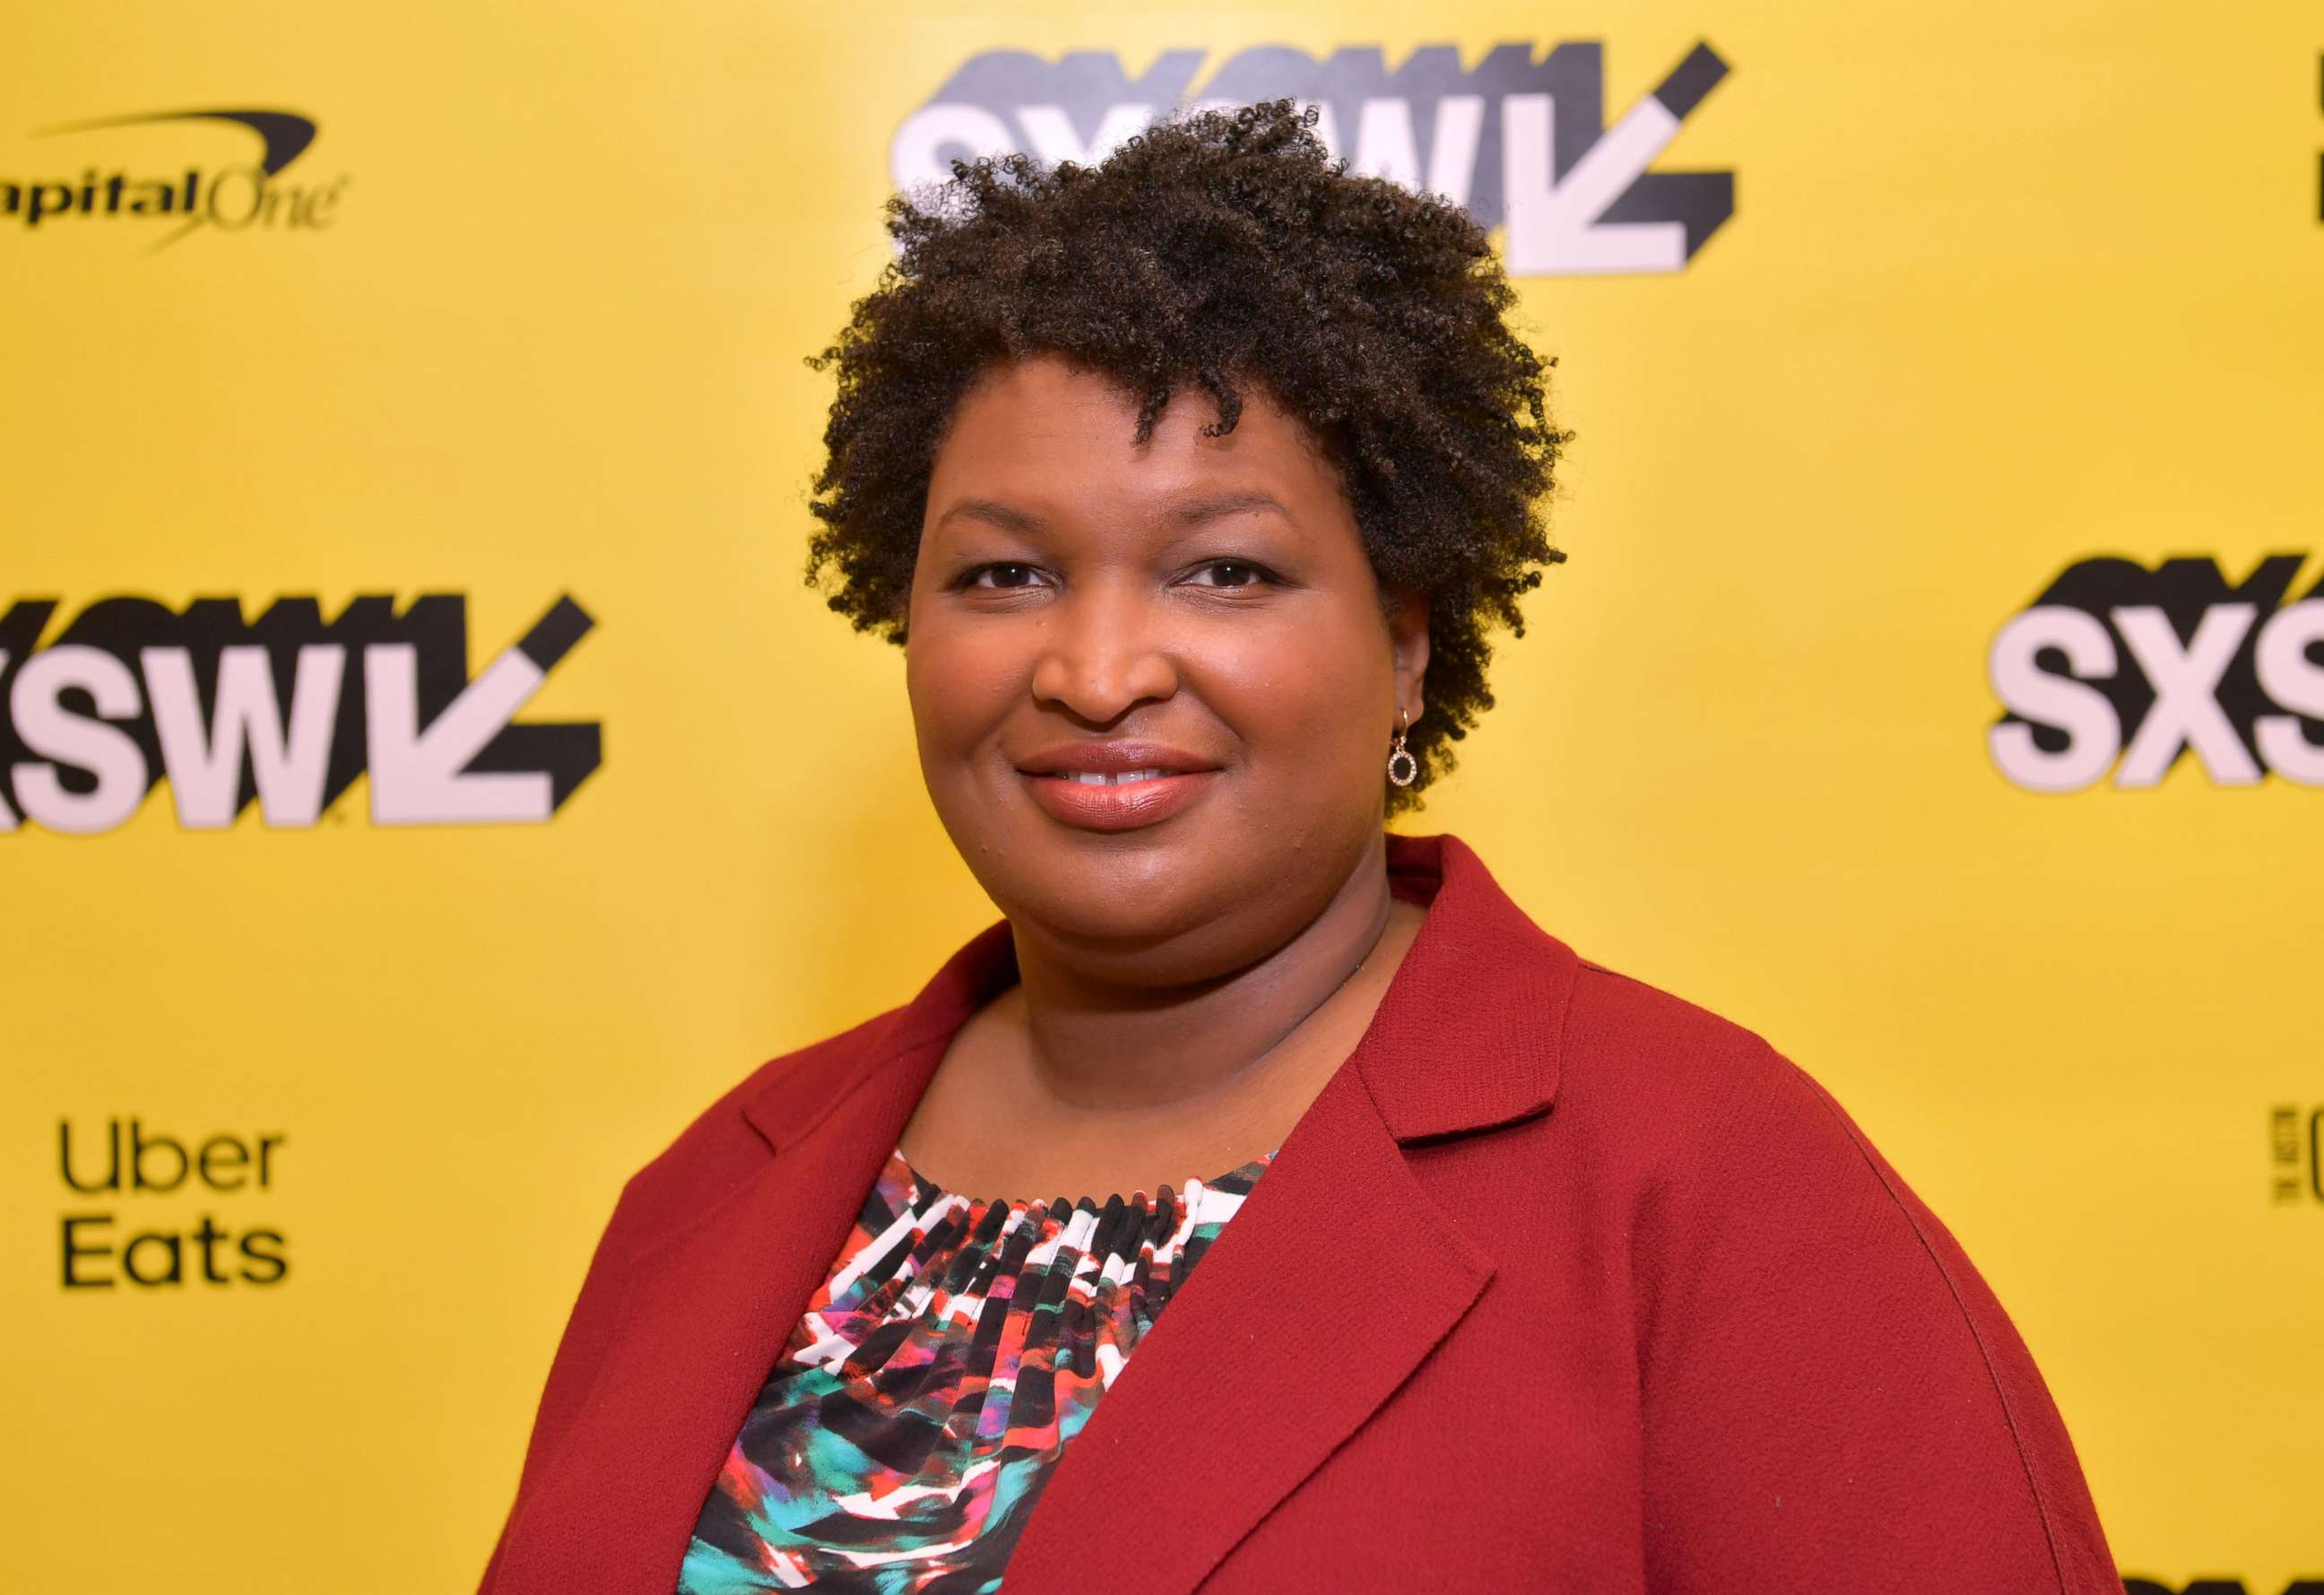 PHOTO: Stacey Abrams attends Featured Session: Lead from the Outside: How to Make Real Change during the 2019 SXSW Conference and Festivals at Hilton Austin, March 11, 2019, in Austin.